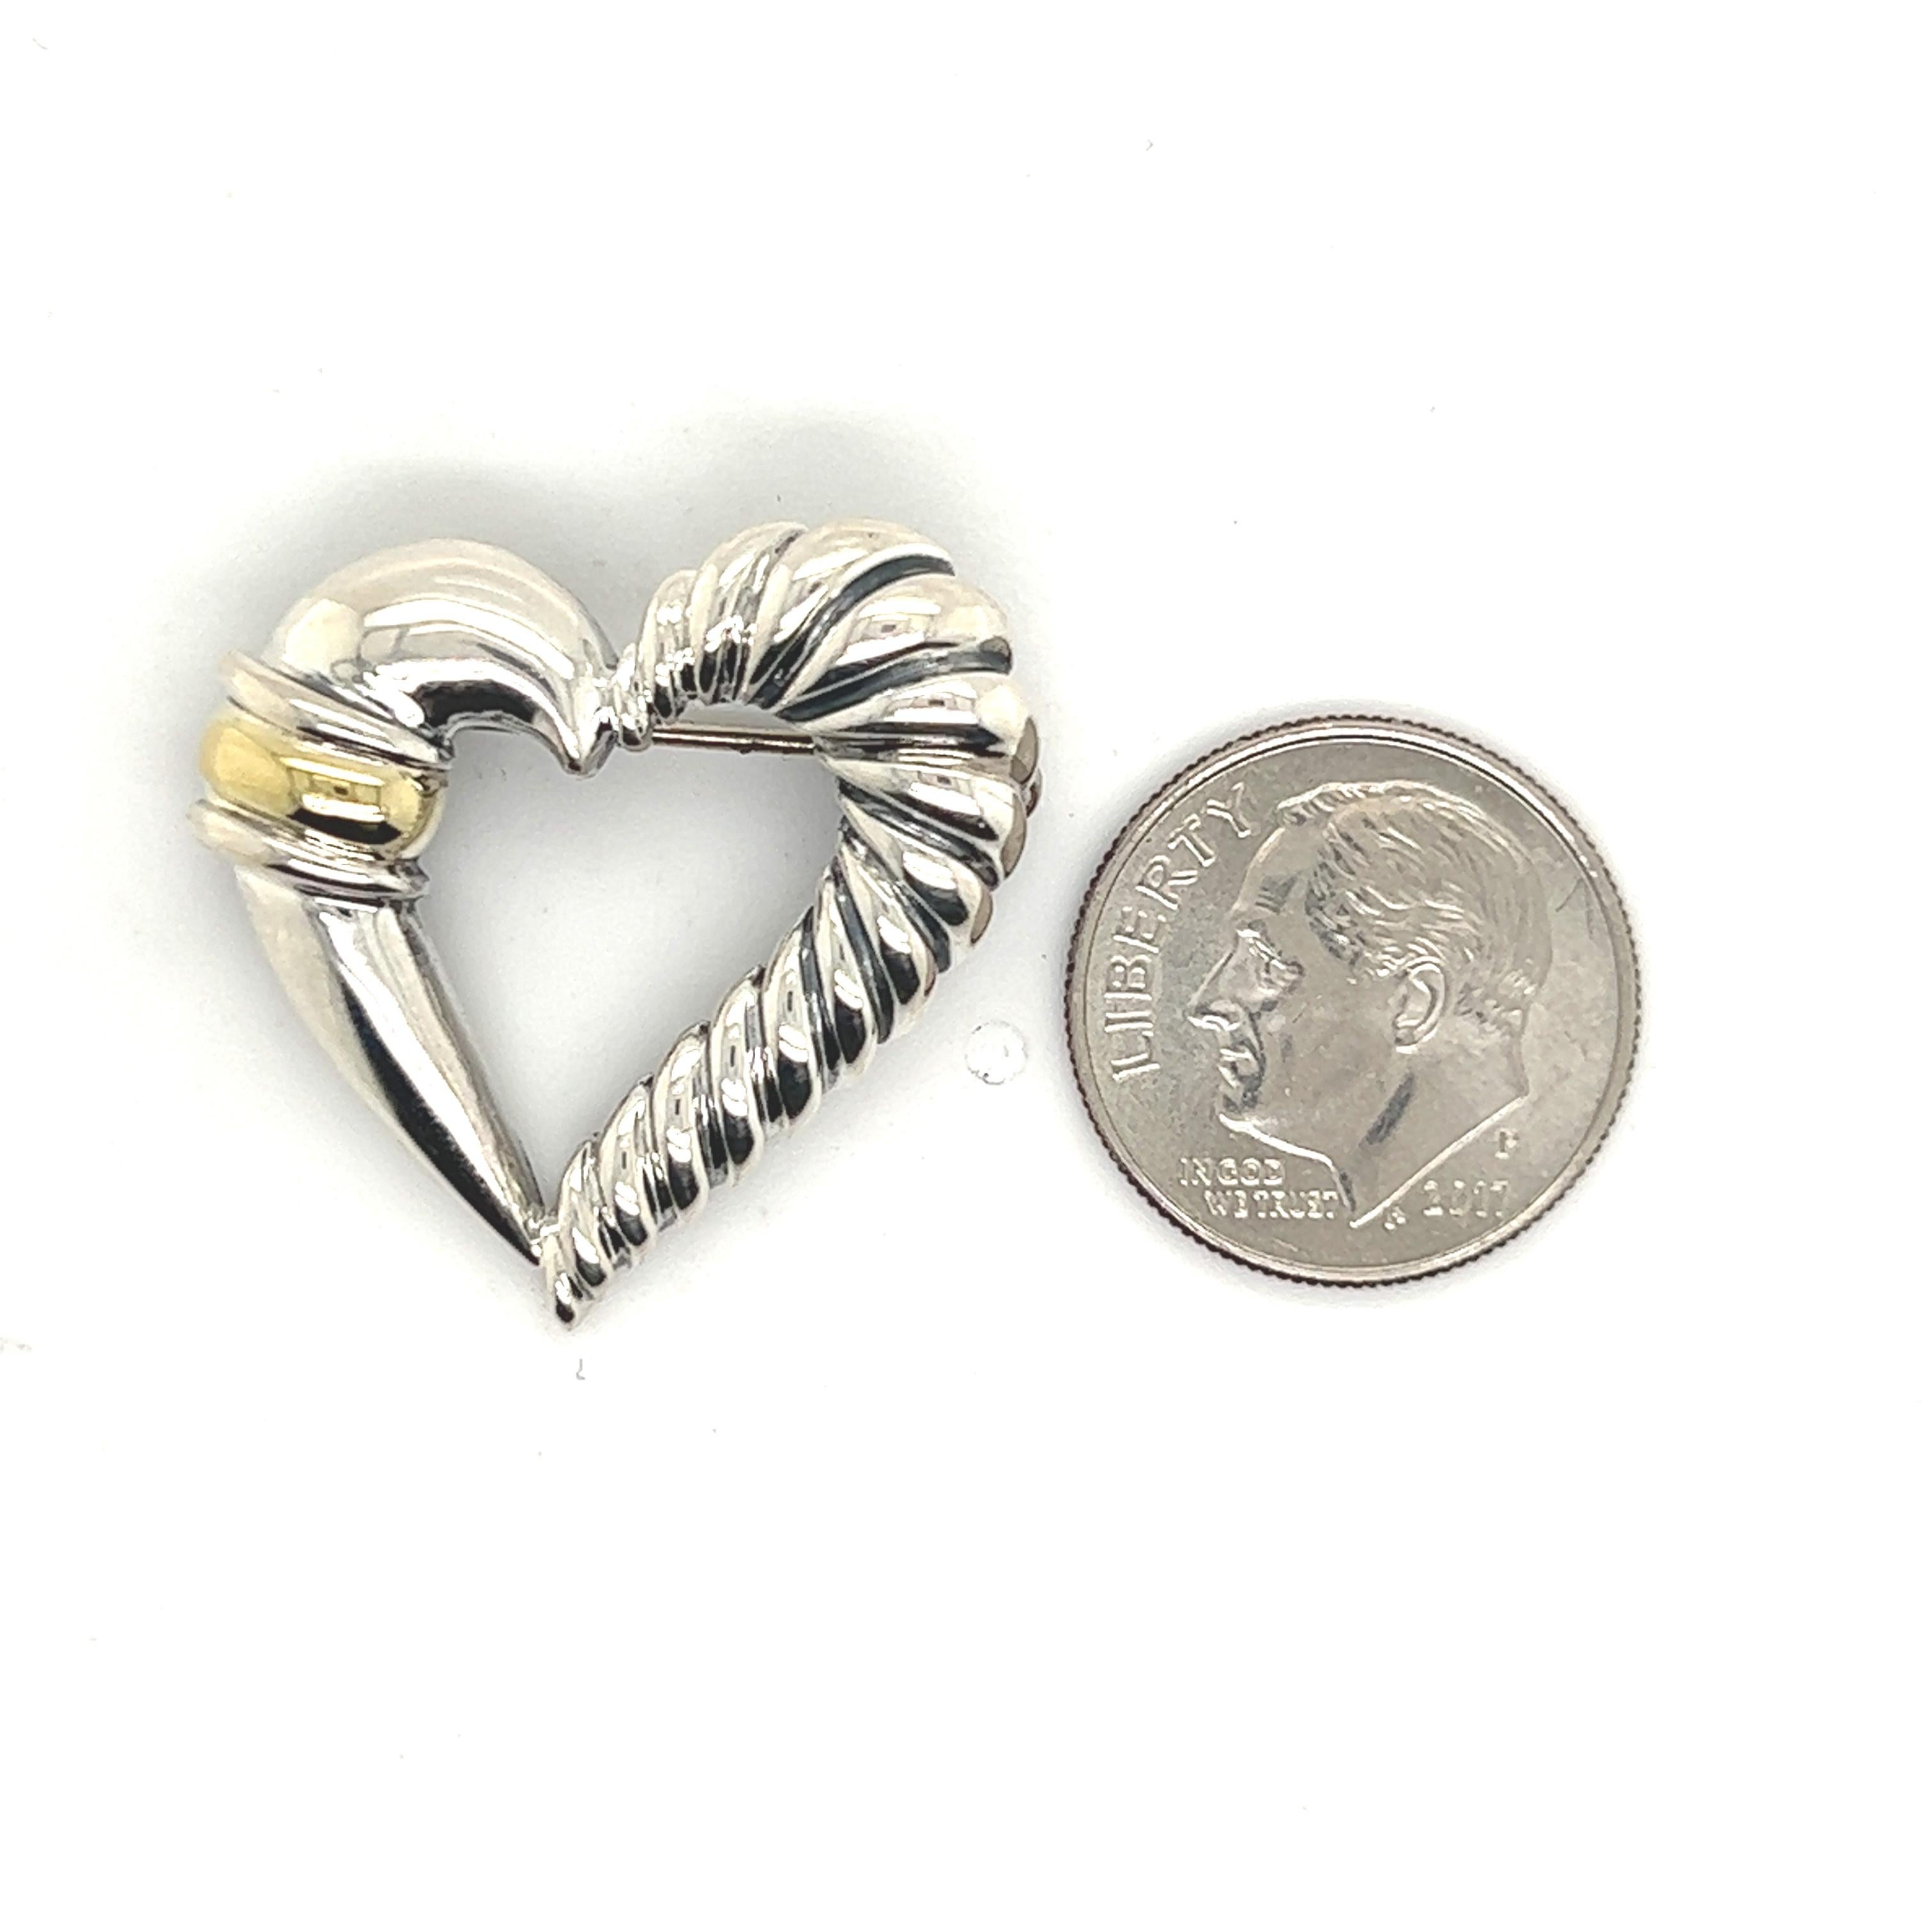 David Yurman Authentic Estate Heart Brooch Pin 14k Gold + Silver In Good Condition For Sale In Brooklyn, NY